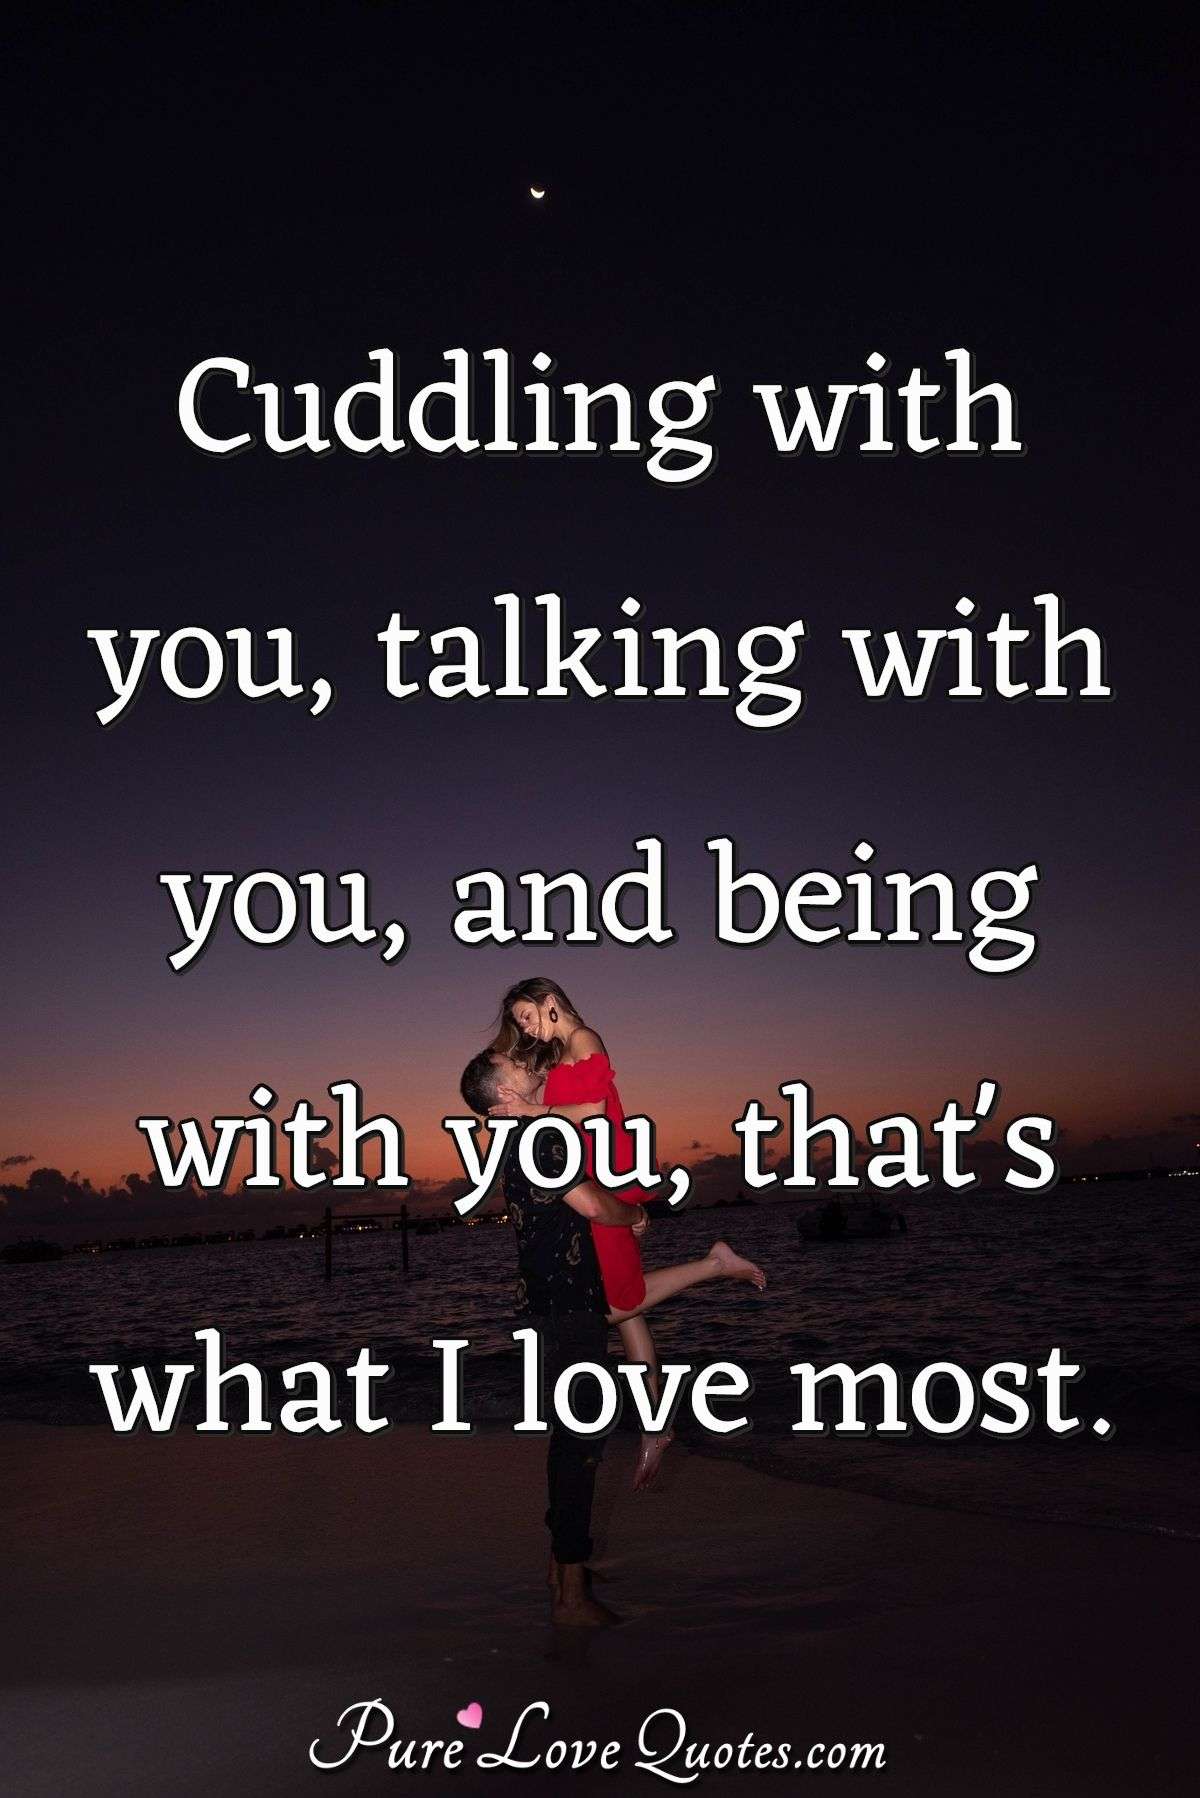 Cuddling with you, talking with you, and being with you, that's what I love most. - Anonymous